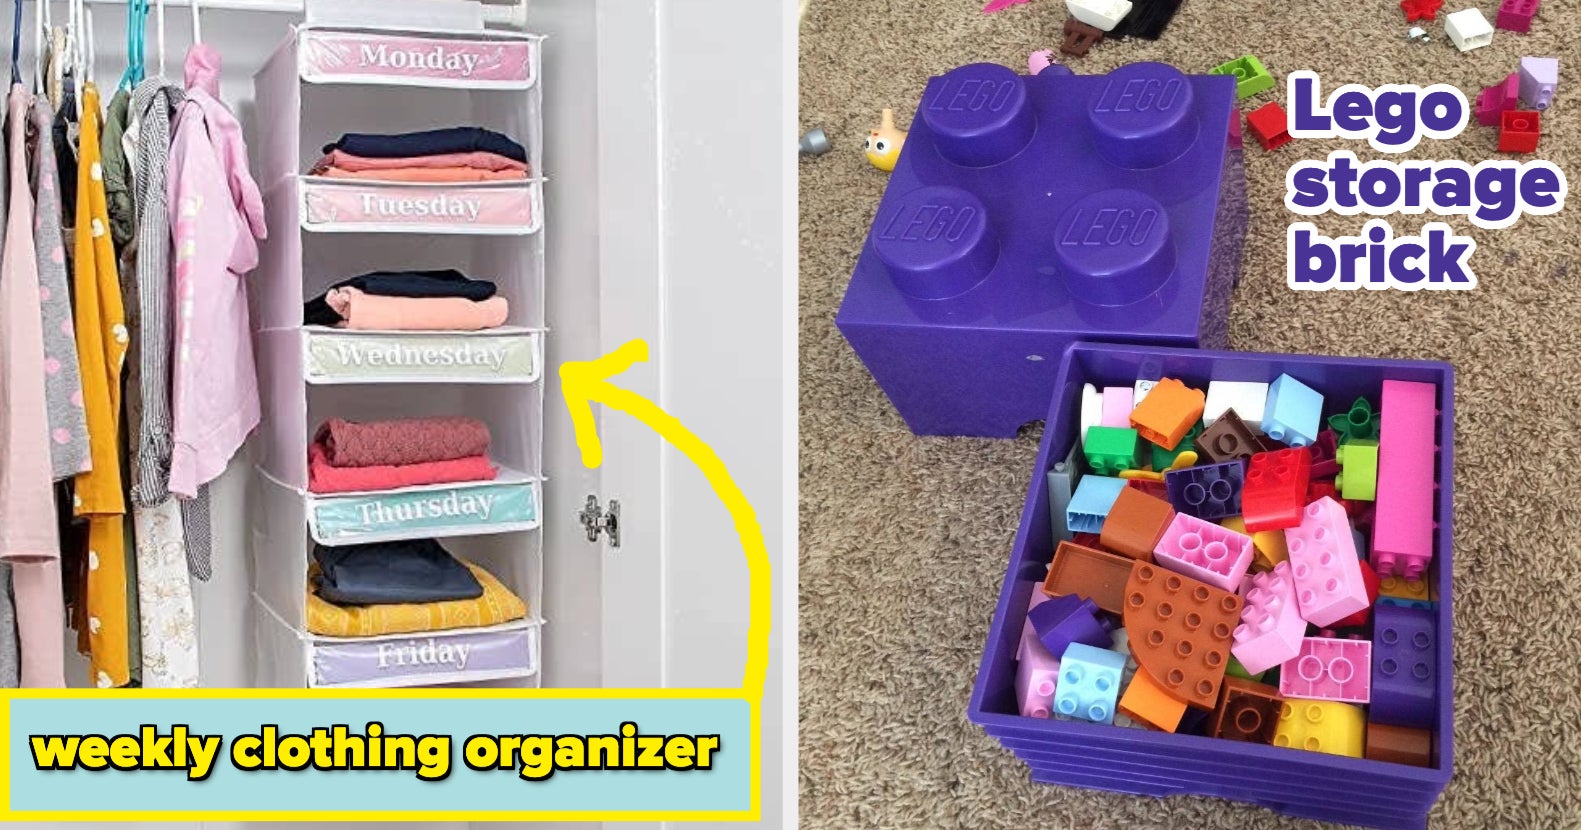 OMG LOL Storage Case Customizable Toy Adjustable Organizer Case Stackable 3  Tier - 30 Compartments - Perfect for Dolls and Small Collectible Toys -  Toys not Included - Blue 